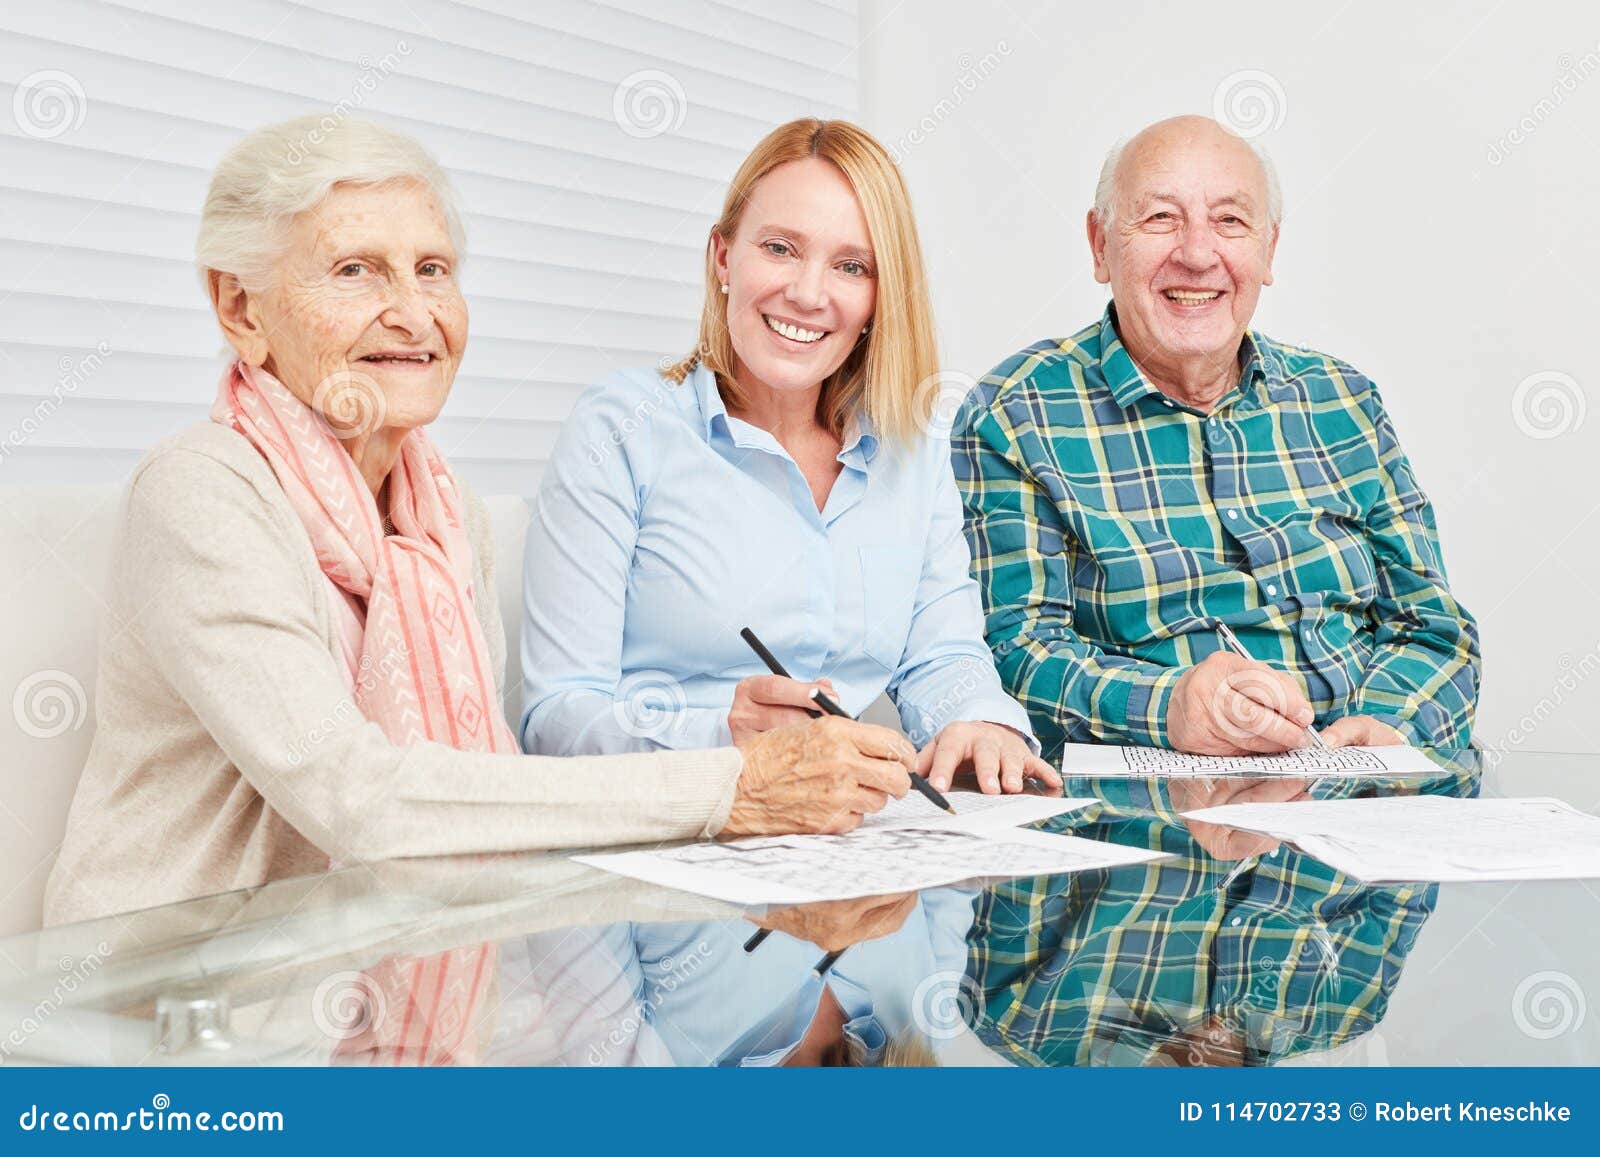 Woman and Seniors Solve Puzzles As Memory Training Stock Image - Image of  riddle, rest: 114702733